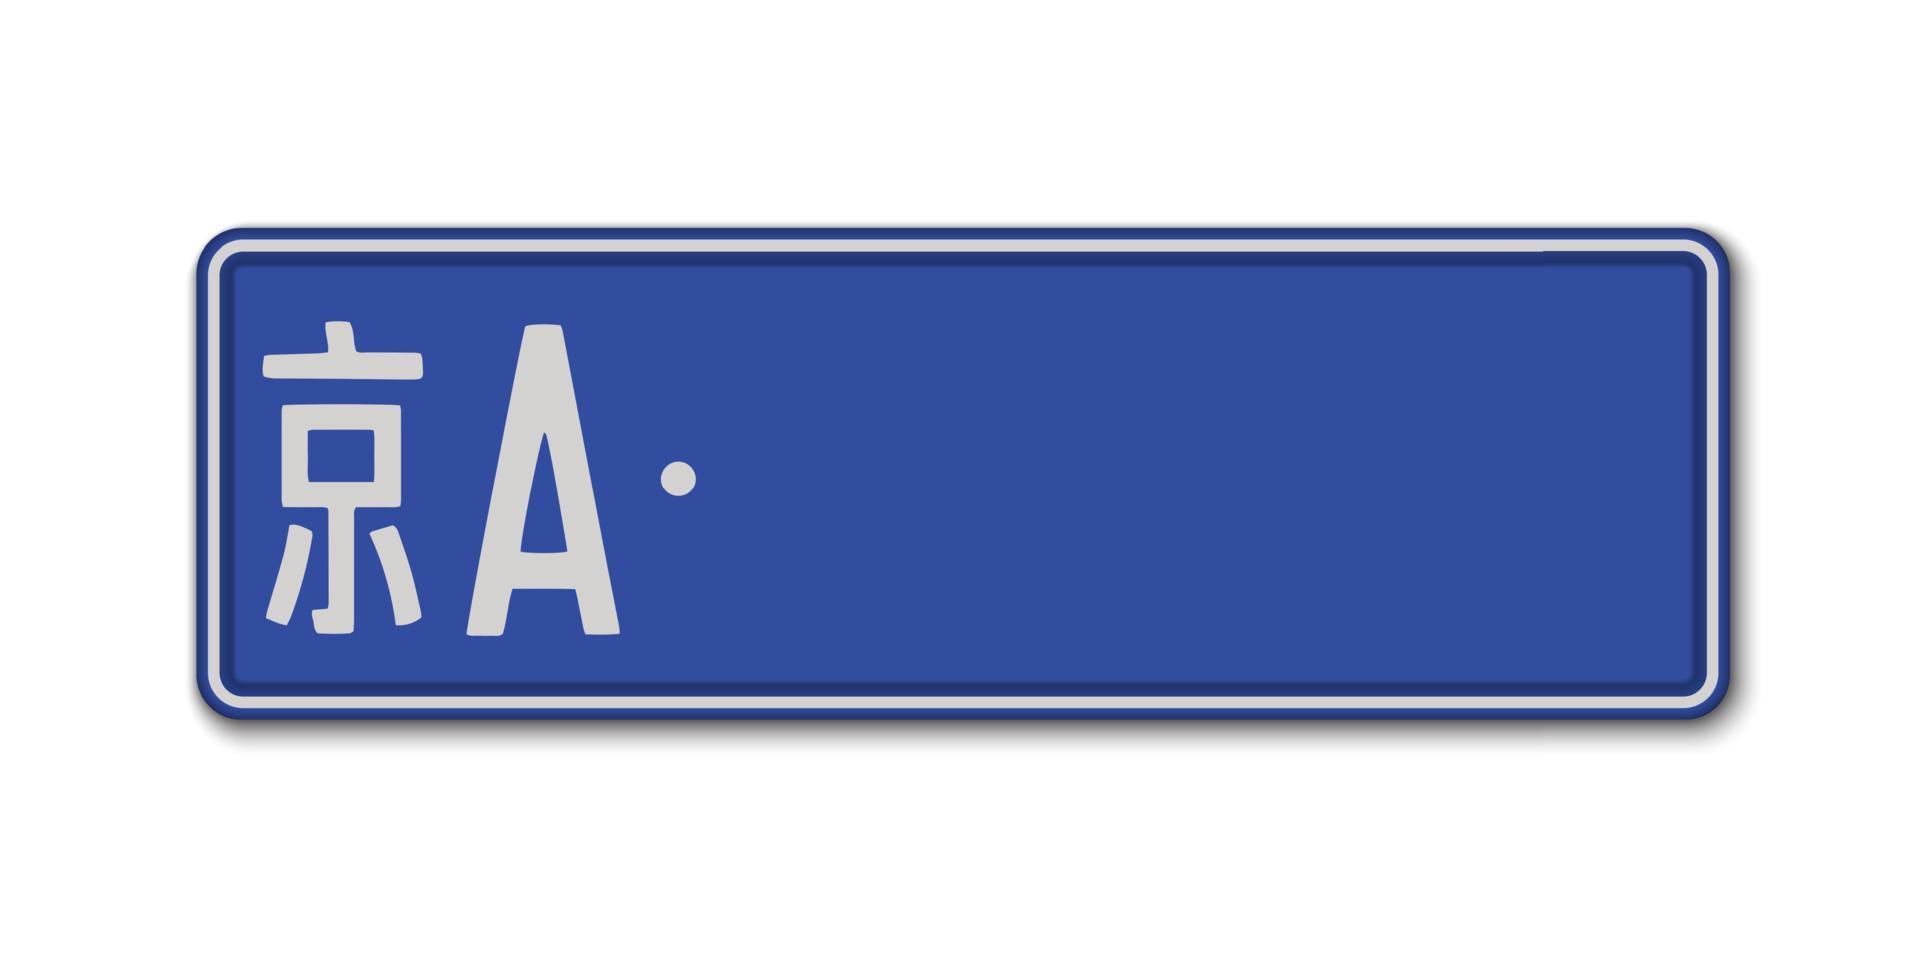 Car number plate. vector